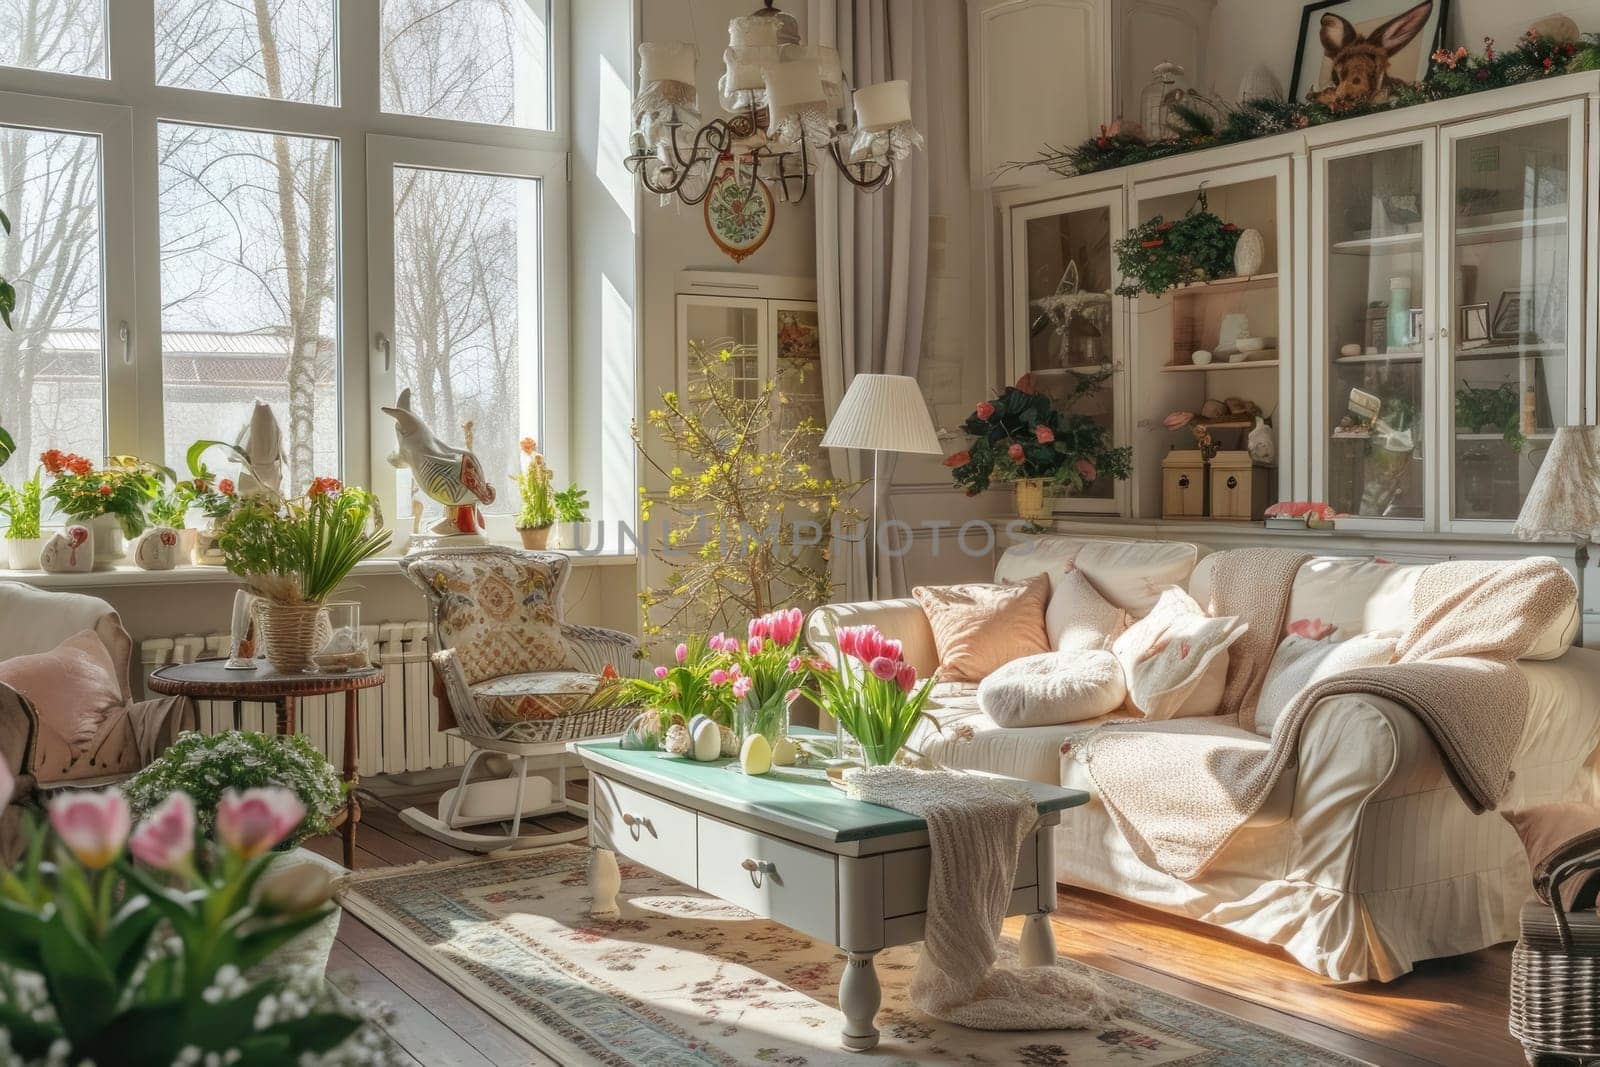 Warm and inviting living room adorned with vibrant flowers and Easter decorations, bathed in natural sunlight from large windows.